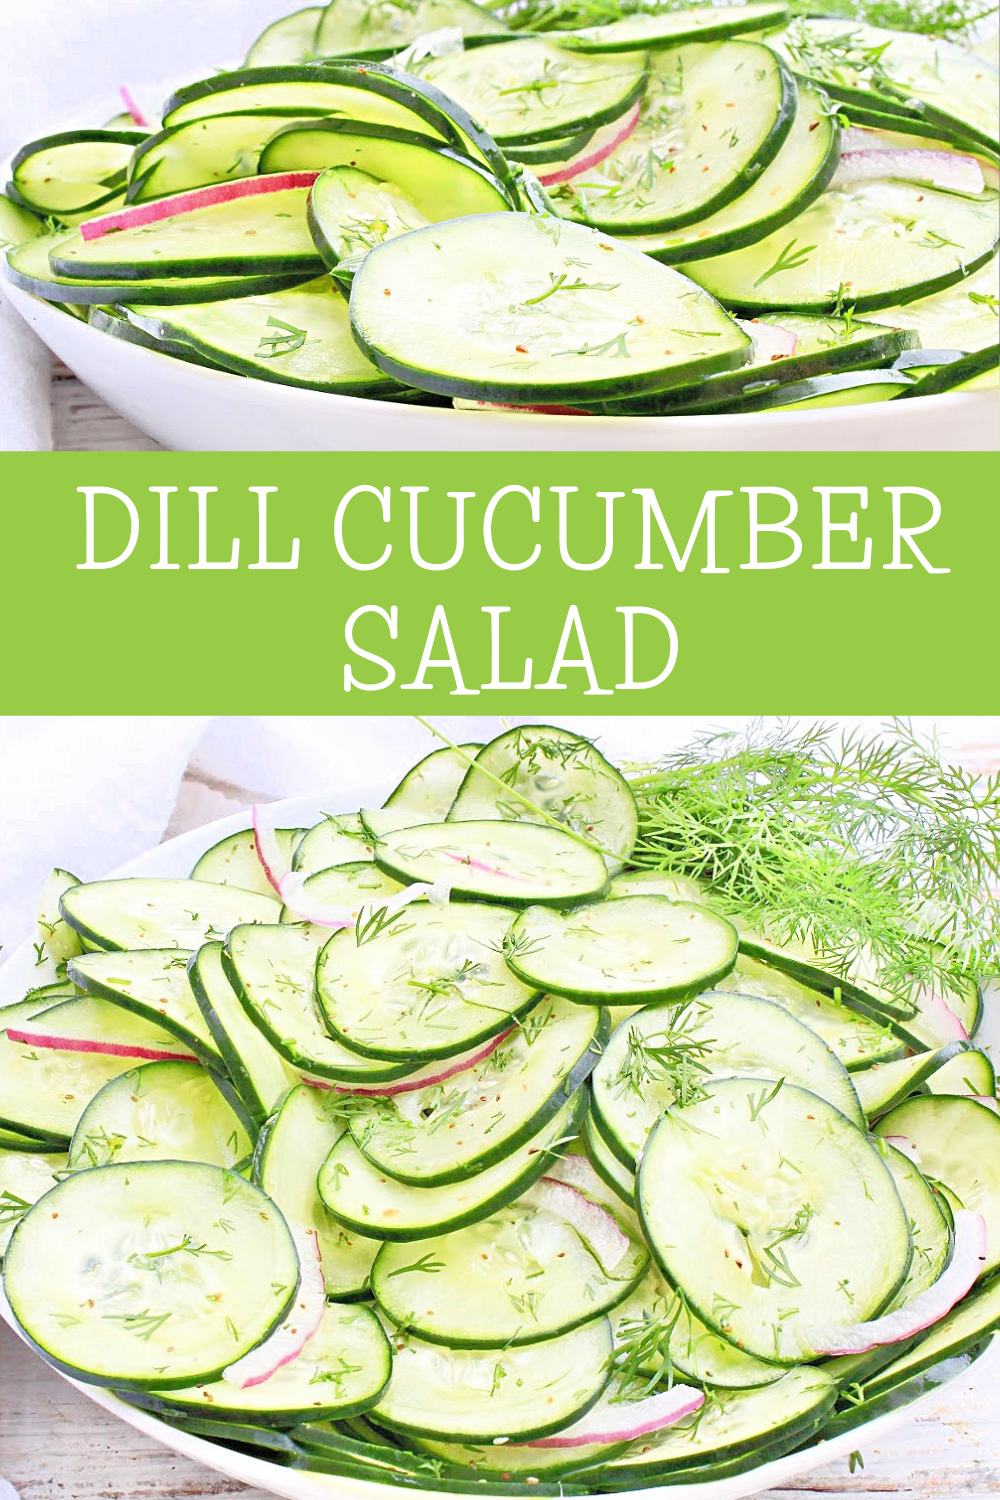 Dill Cucumber Salad (Gurkensalat) ~ Cool, refreshing, and crisp salad with sliced cucumbers and fresh dill in an easy vinegar-based dressing! via @thiswifecooks